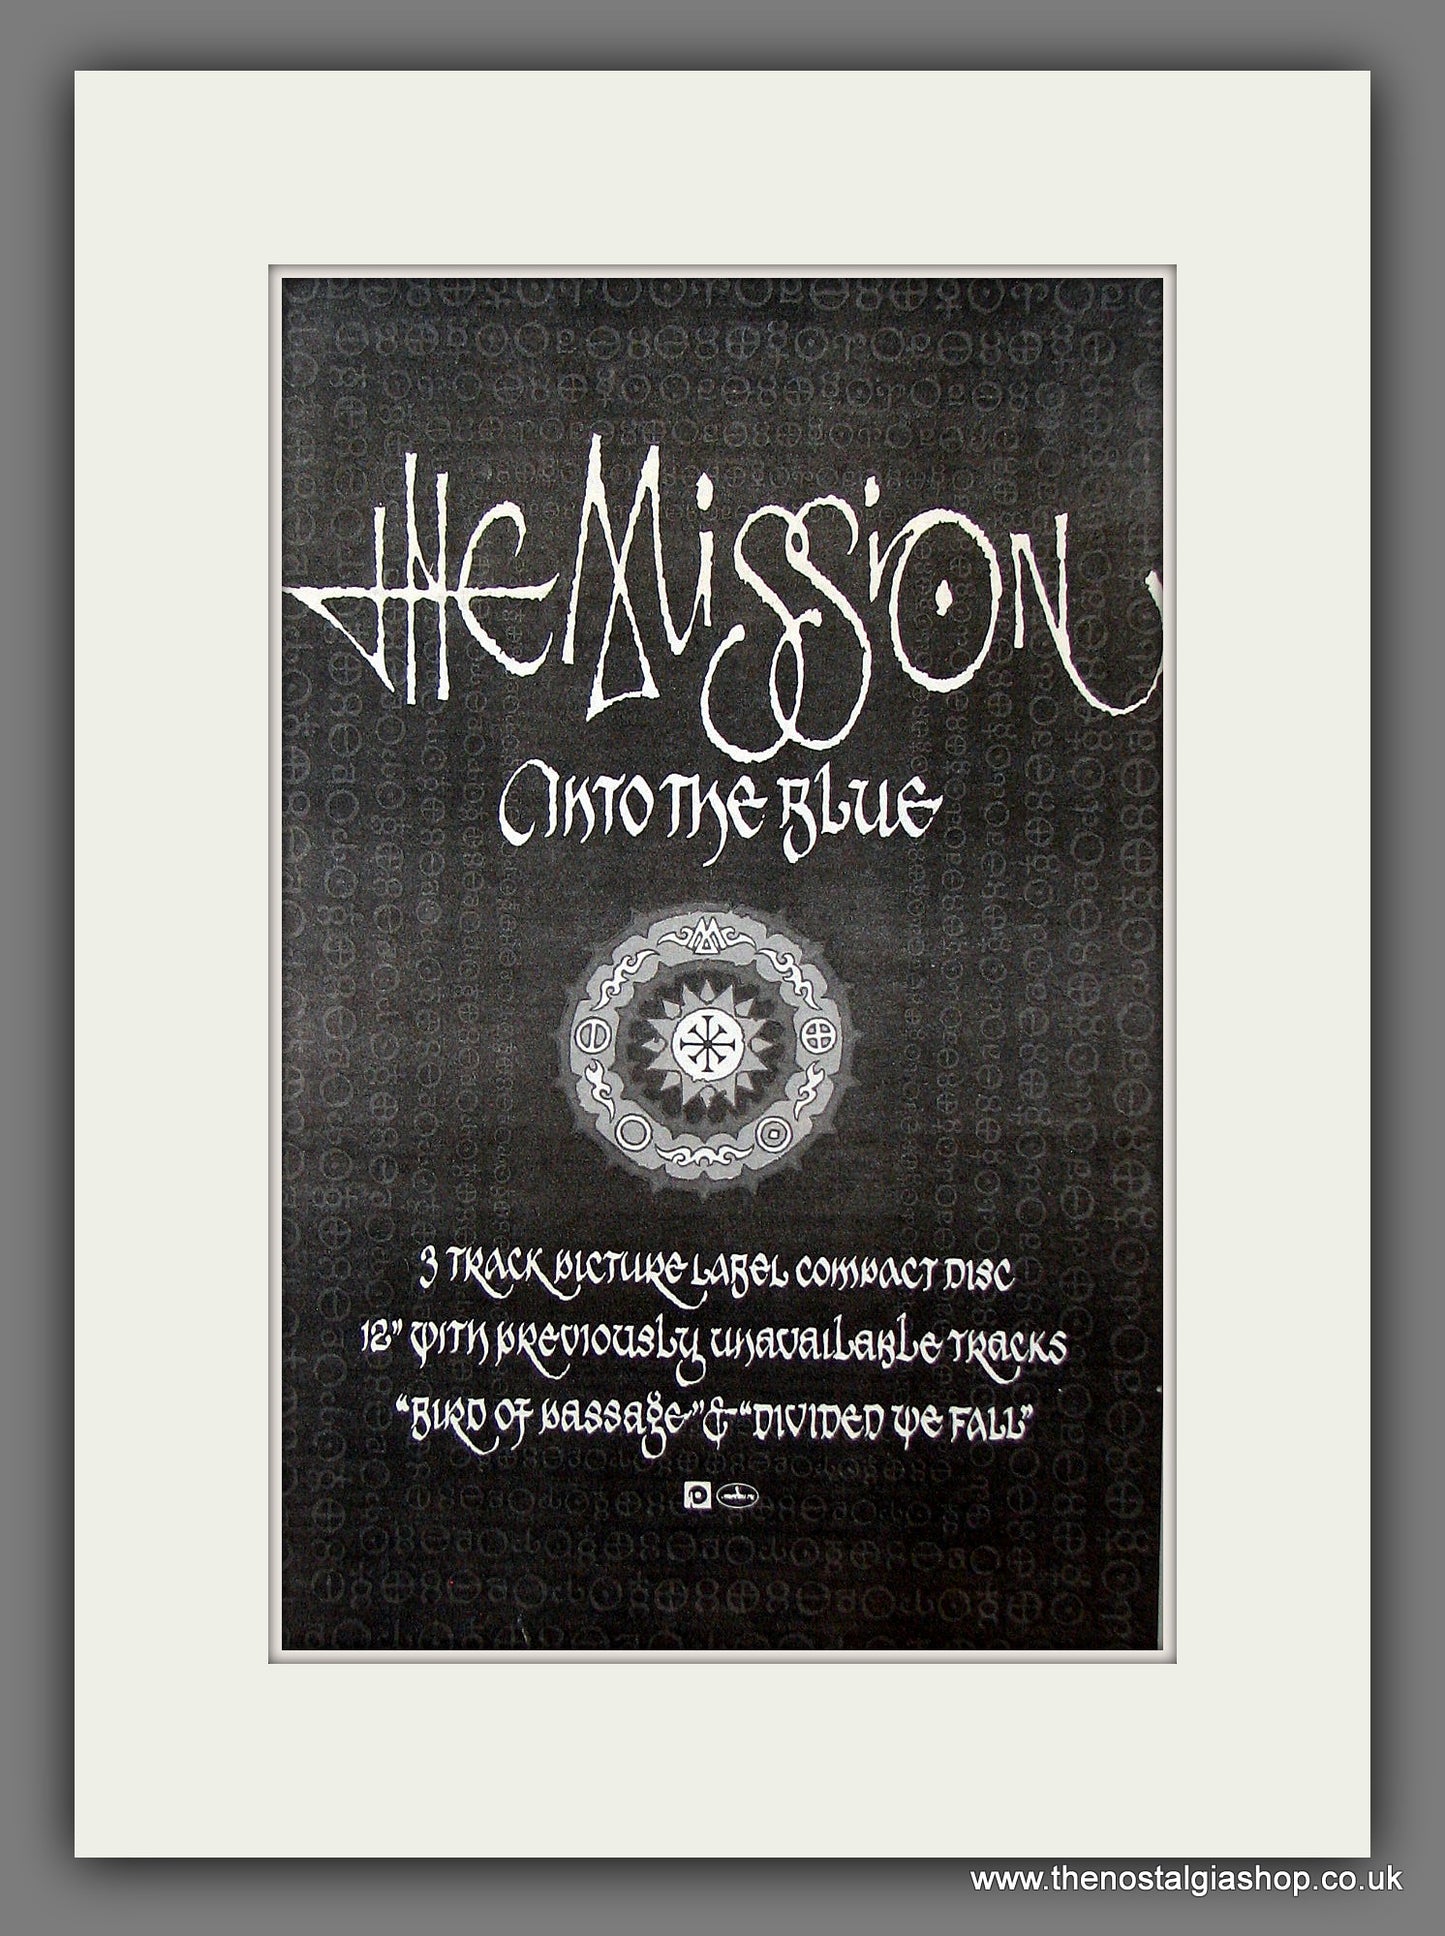 Mission (The) Into The Blue. Original Vintage Advert 1989 (ref AD56434)